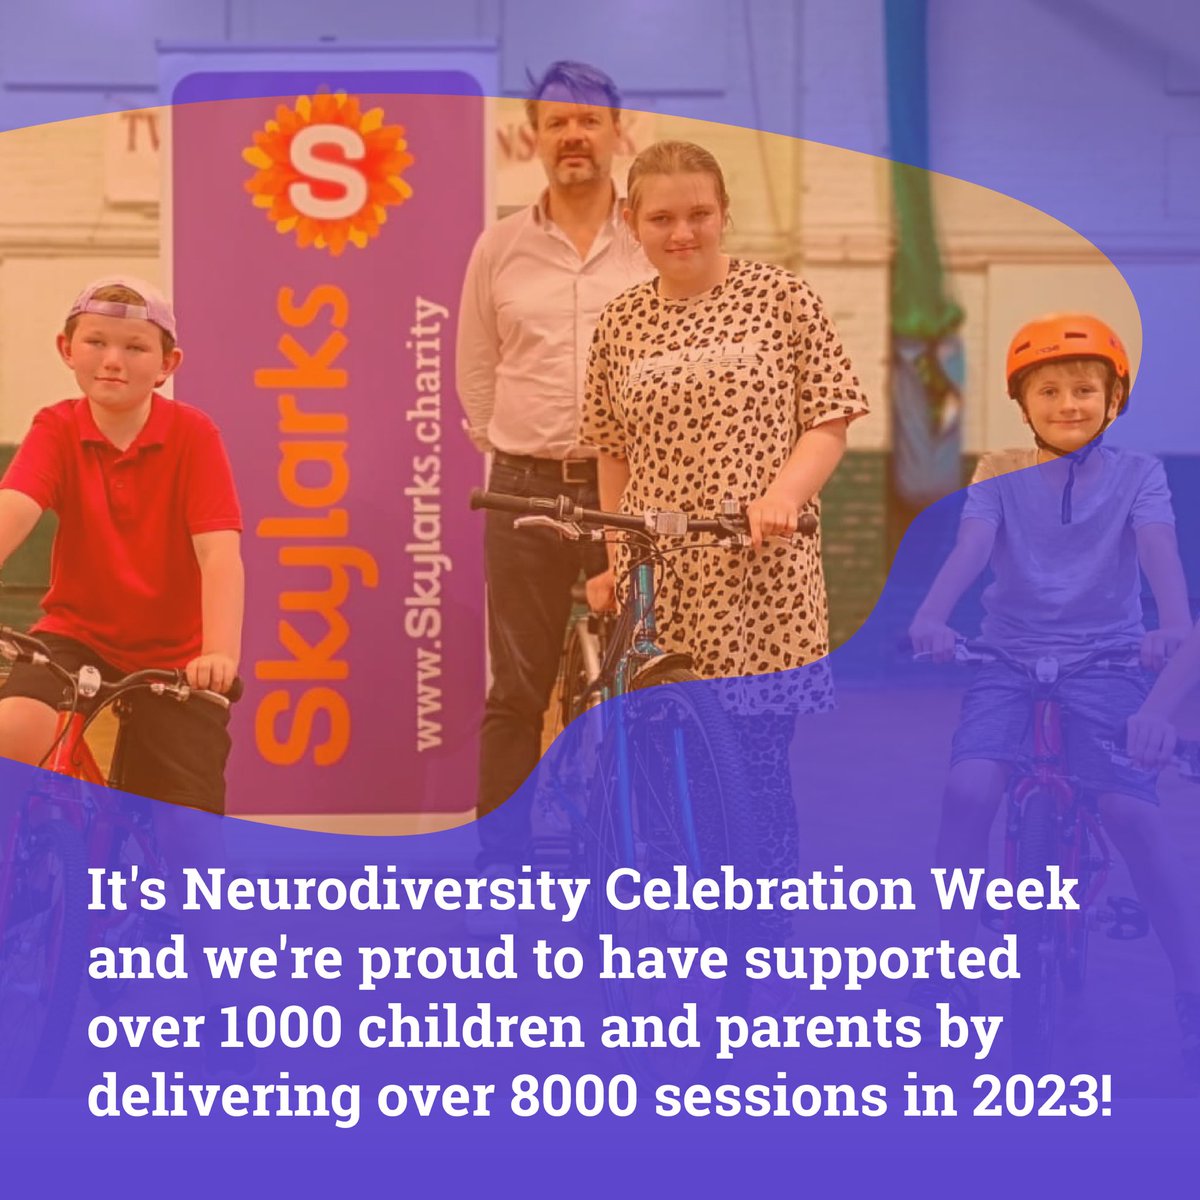 Empowering neurodiverse child to thrive!
Discover more about our services today! 🧠✨
 
skylarks.charity/page/what-we-do
 
#NeurodiversityWeek #InclusionMatters #EquityDiversityInclusion #skylarkscharity